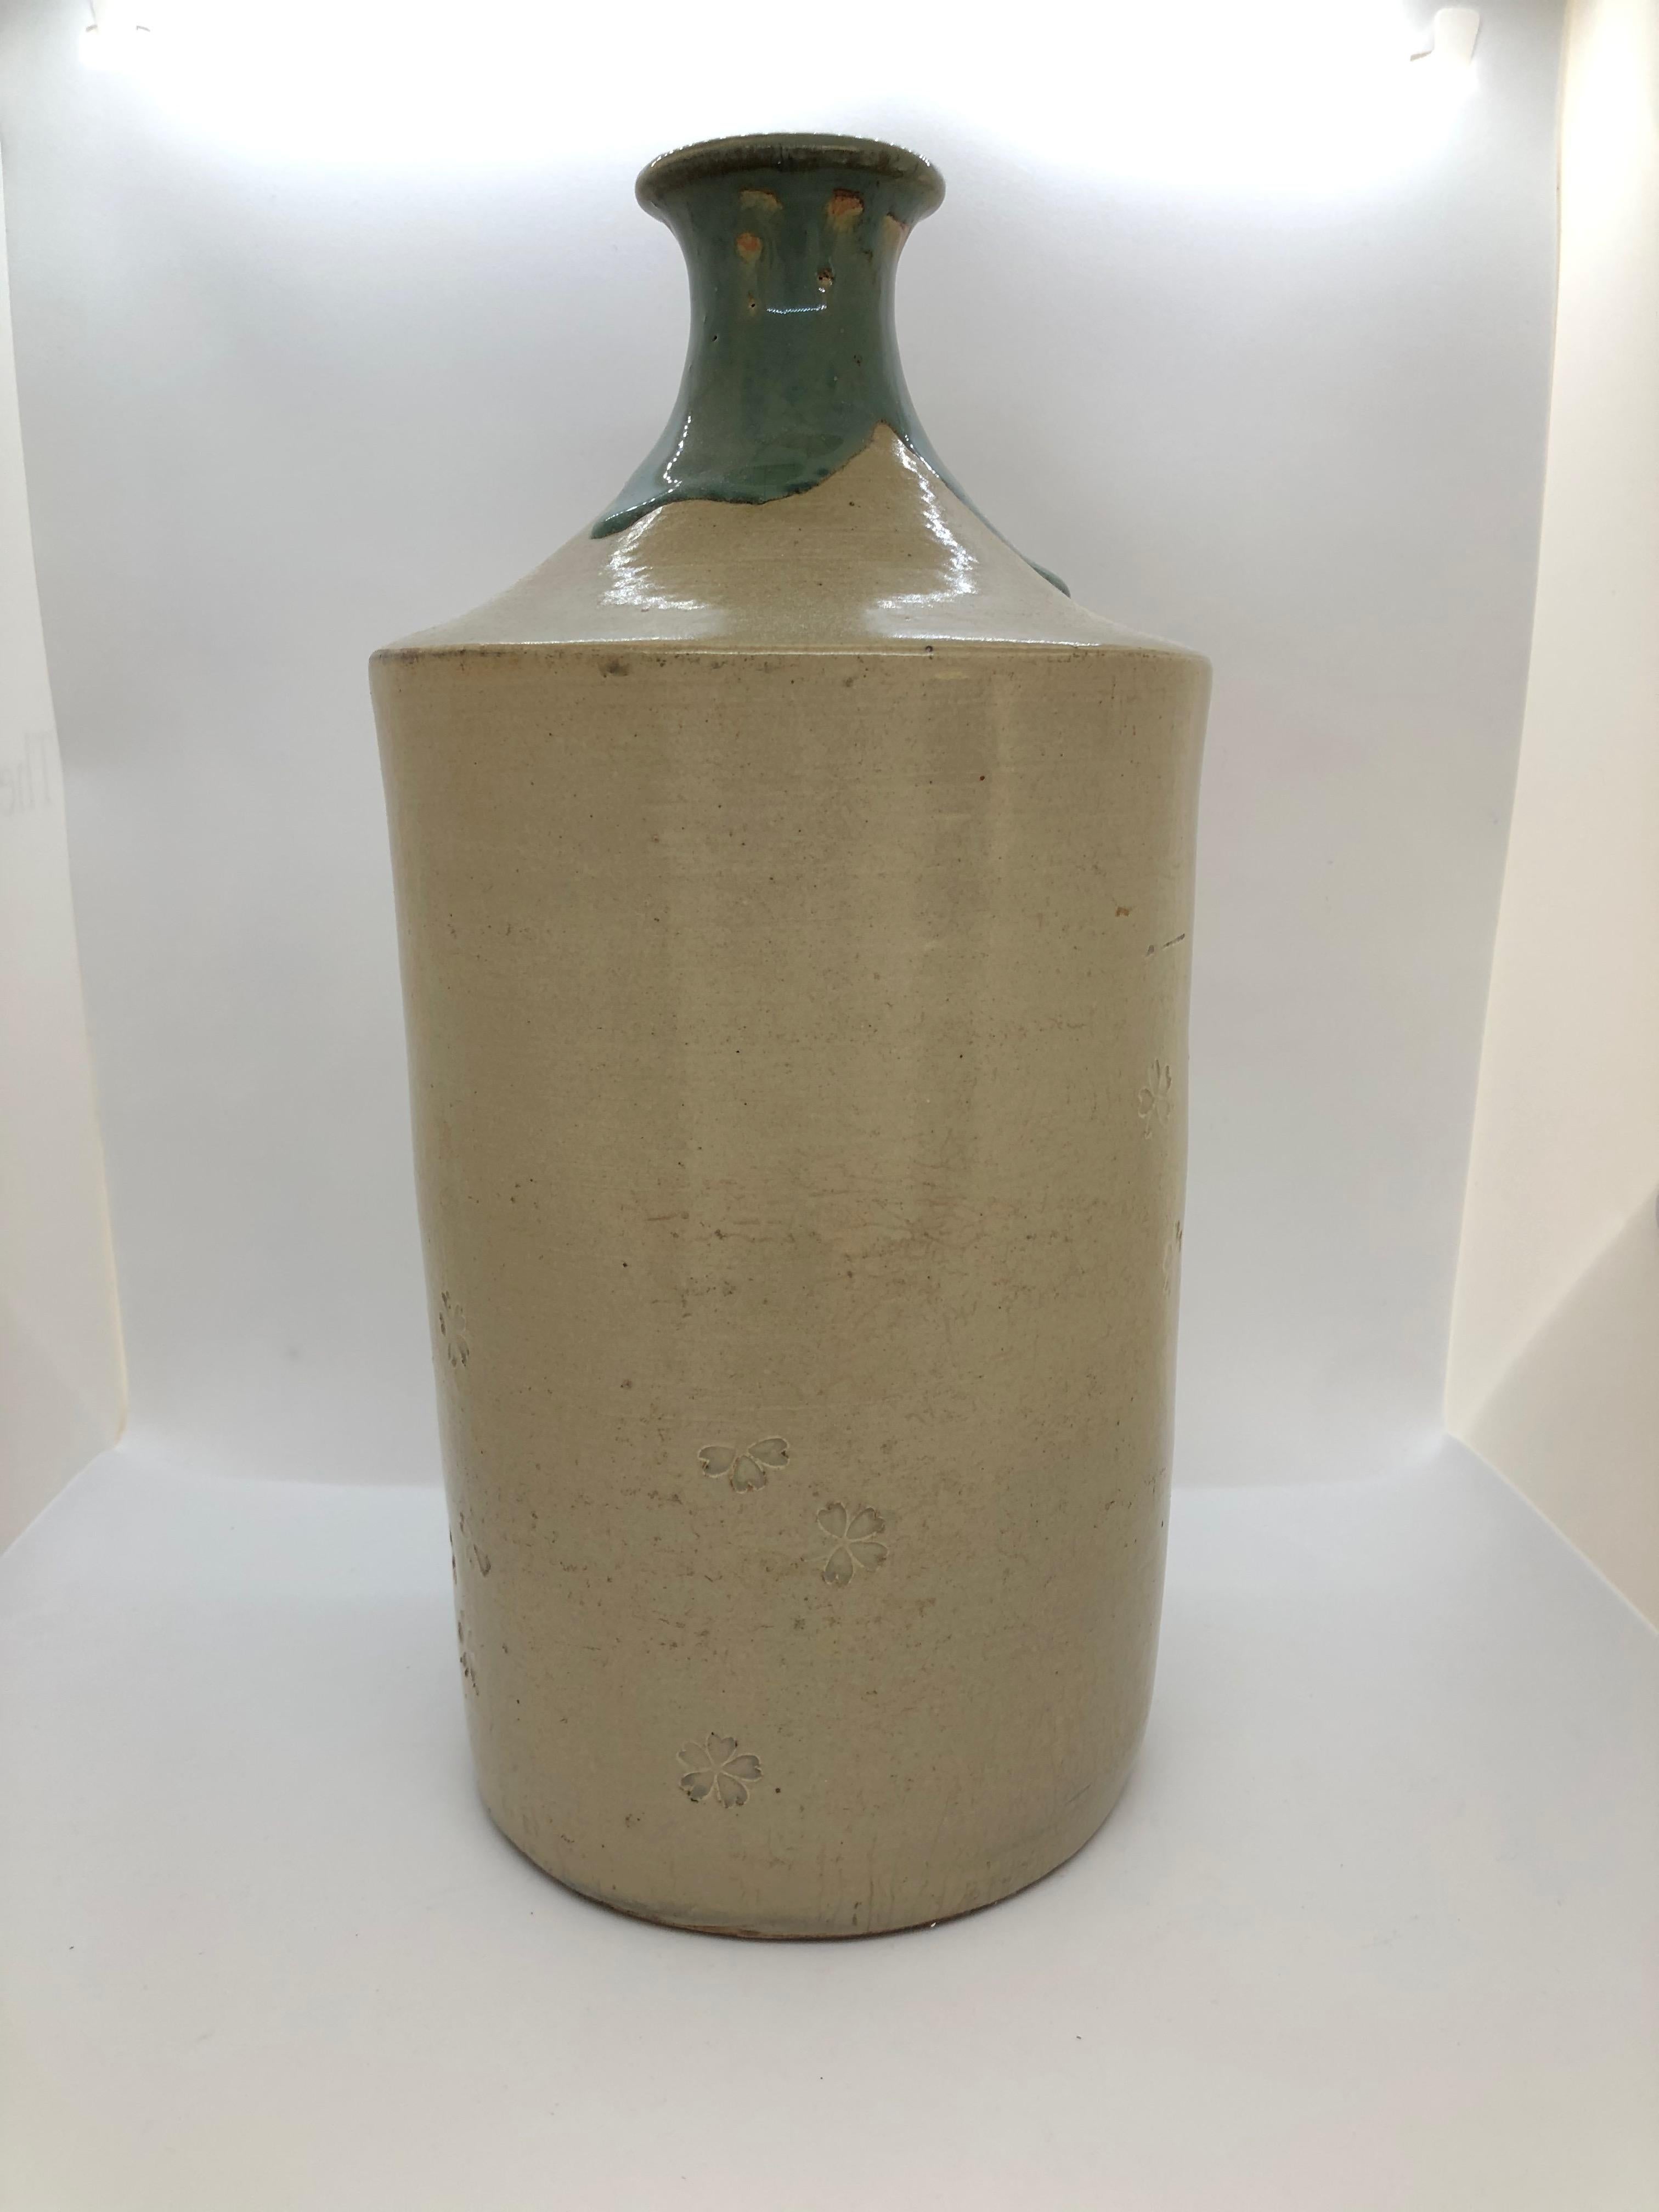 A Japanese glazed pottery vase of clean and exclusive design.